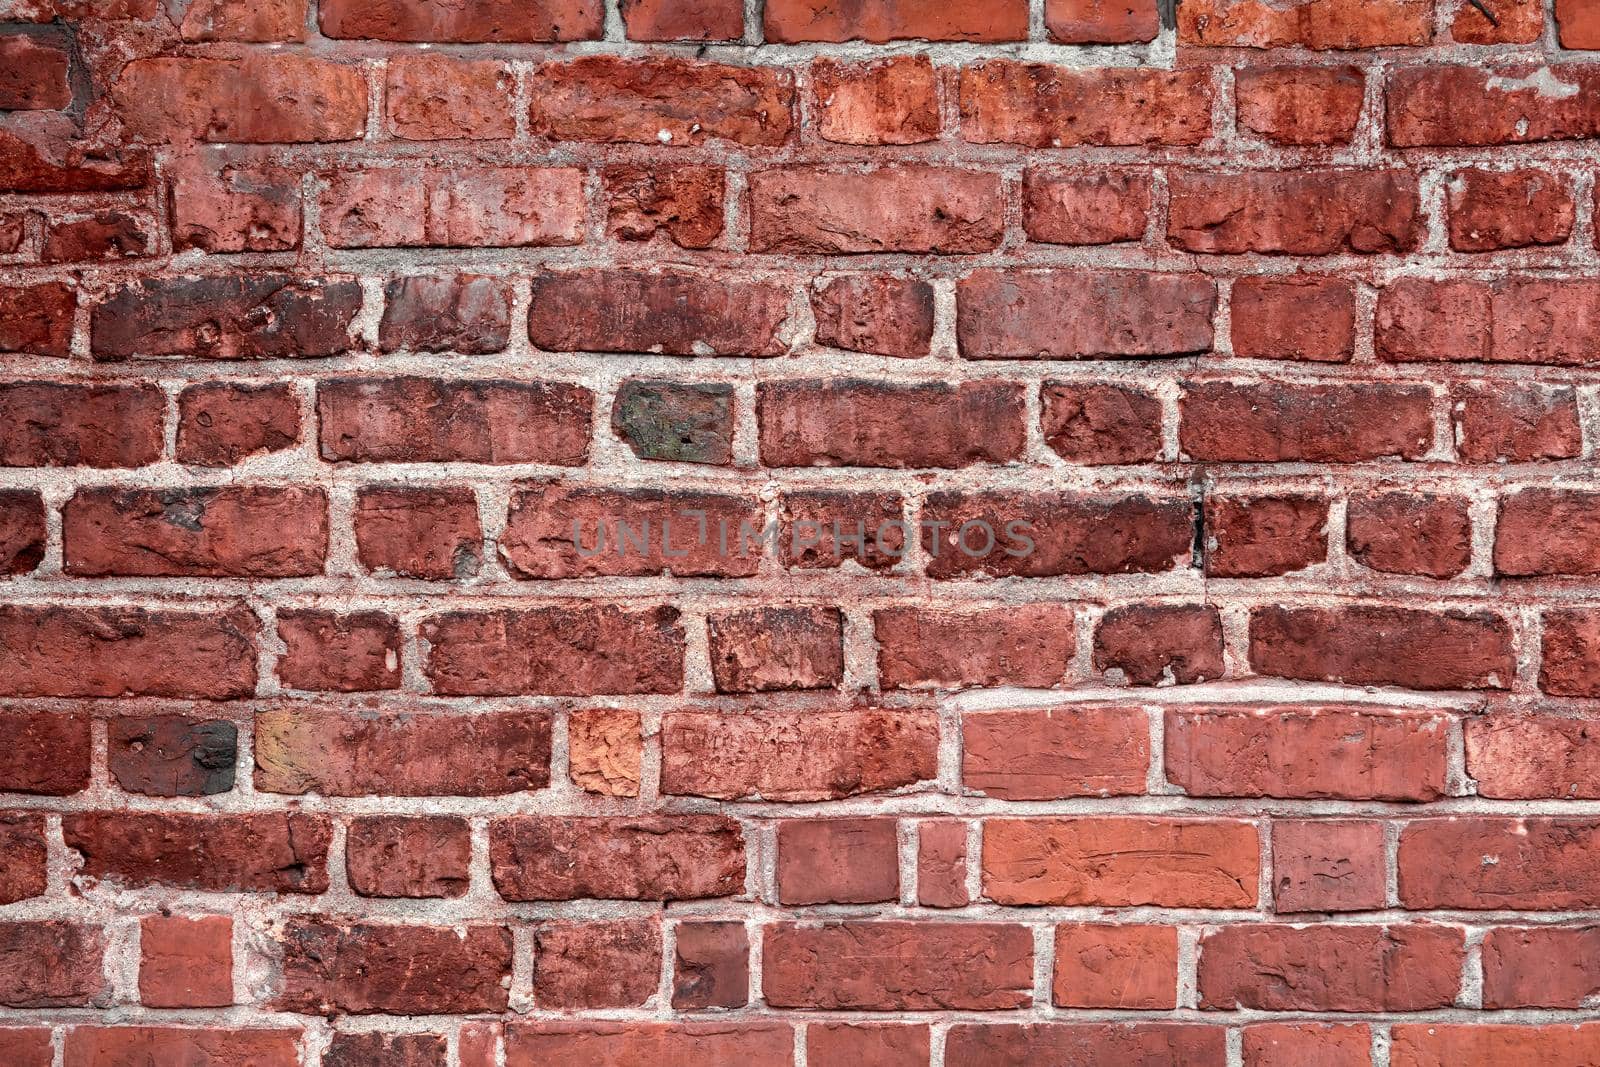 Old brick wall. Horizontal wide red color brick wall background. Vintage house facade